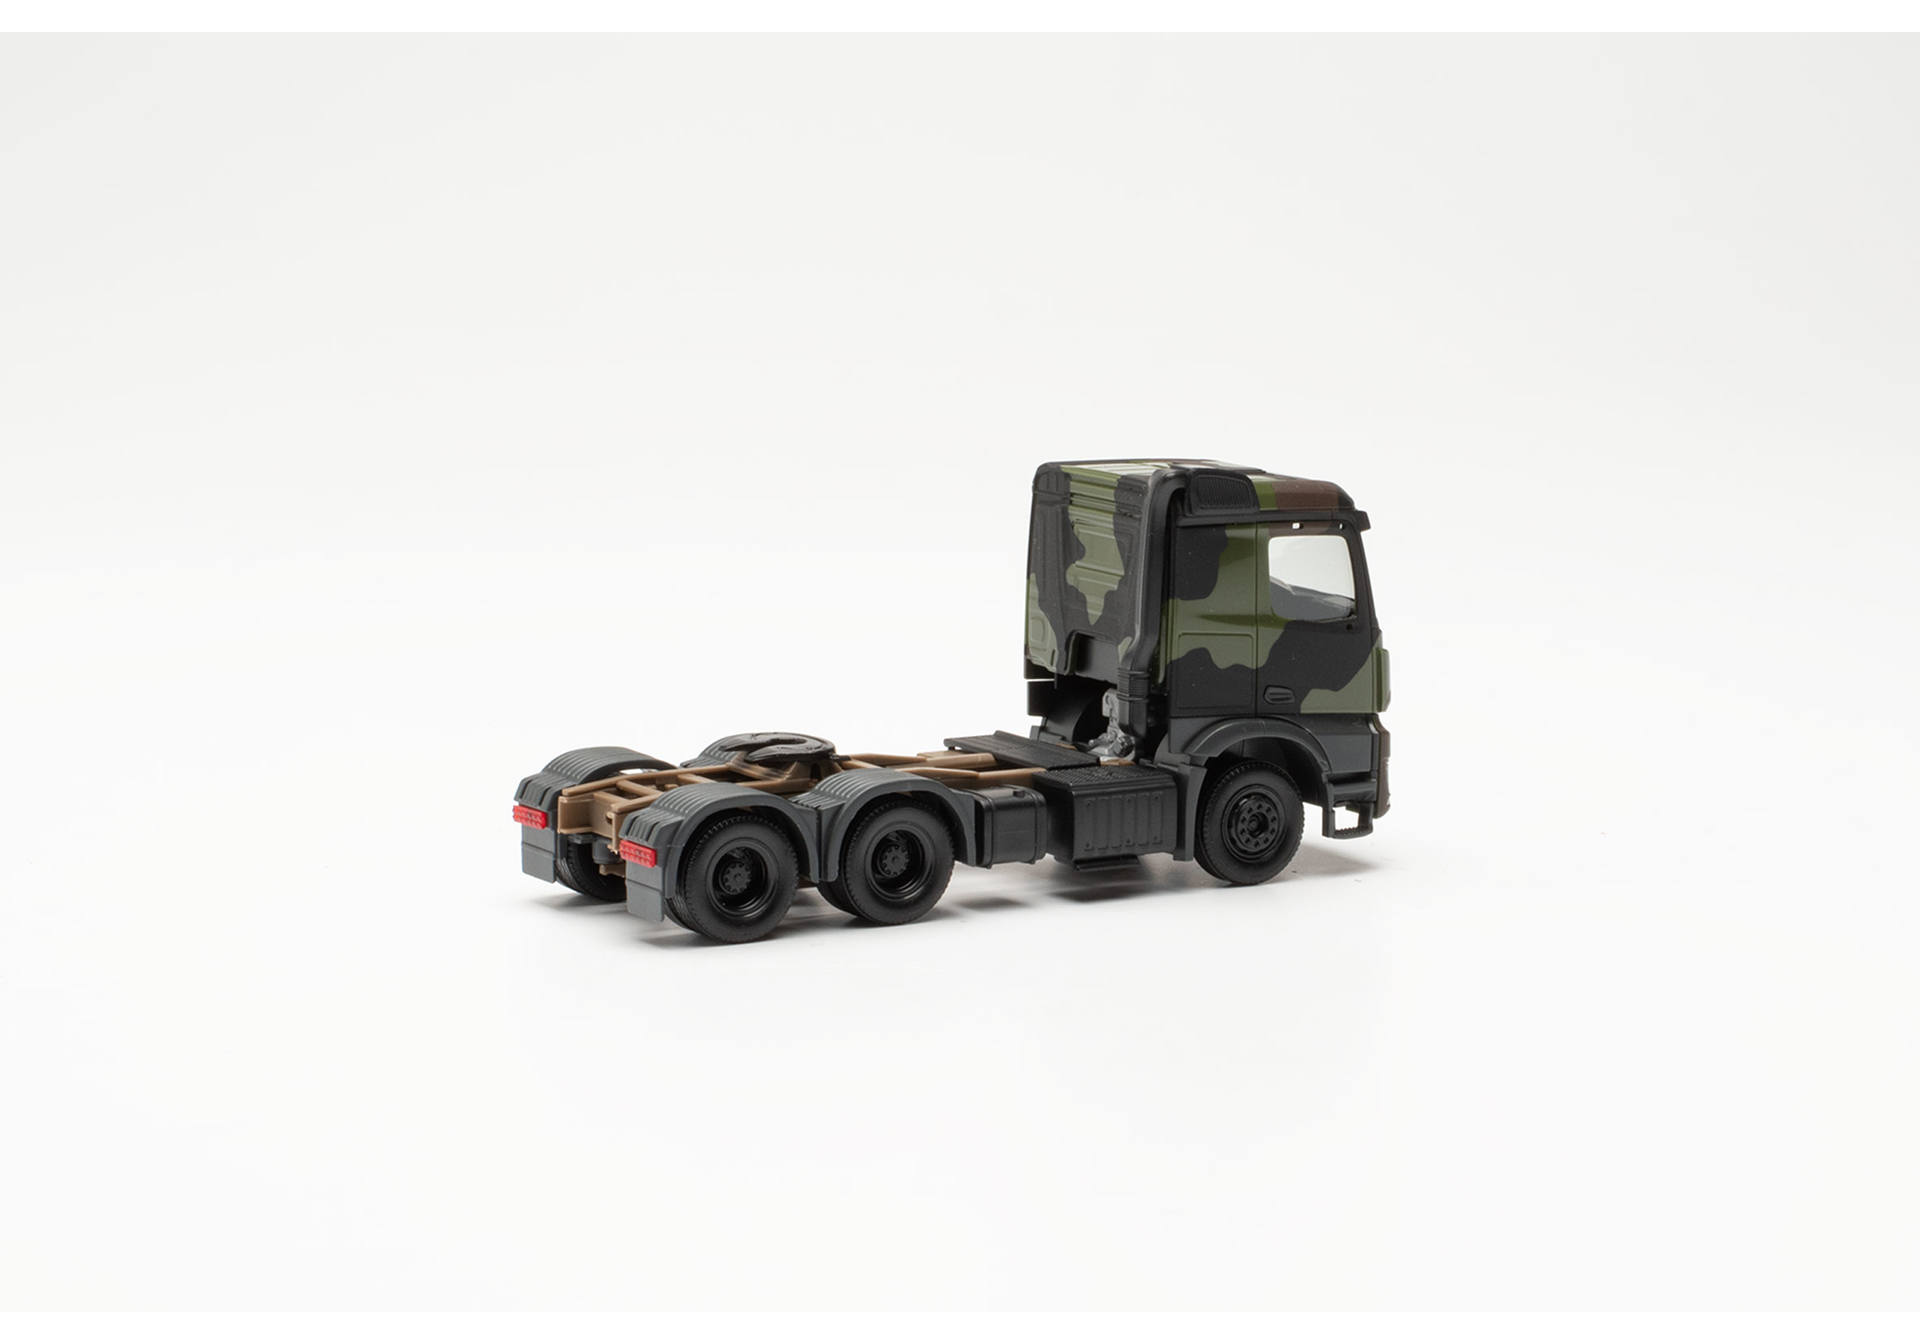 Mercedes-Benz Arocs 6x4 rigid tractor "German Armed Forces", camouflage